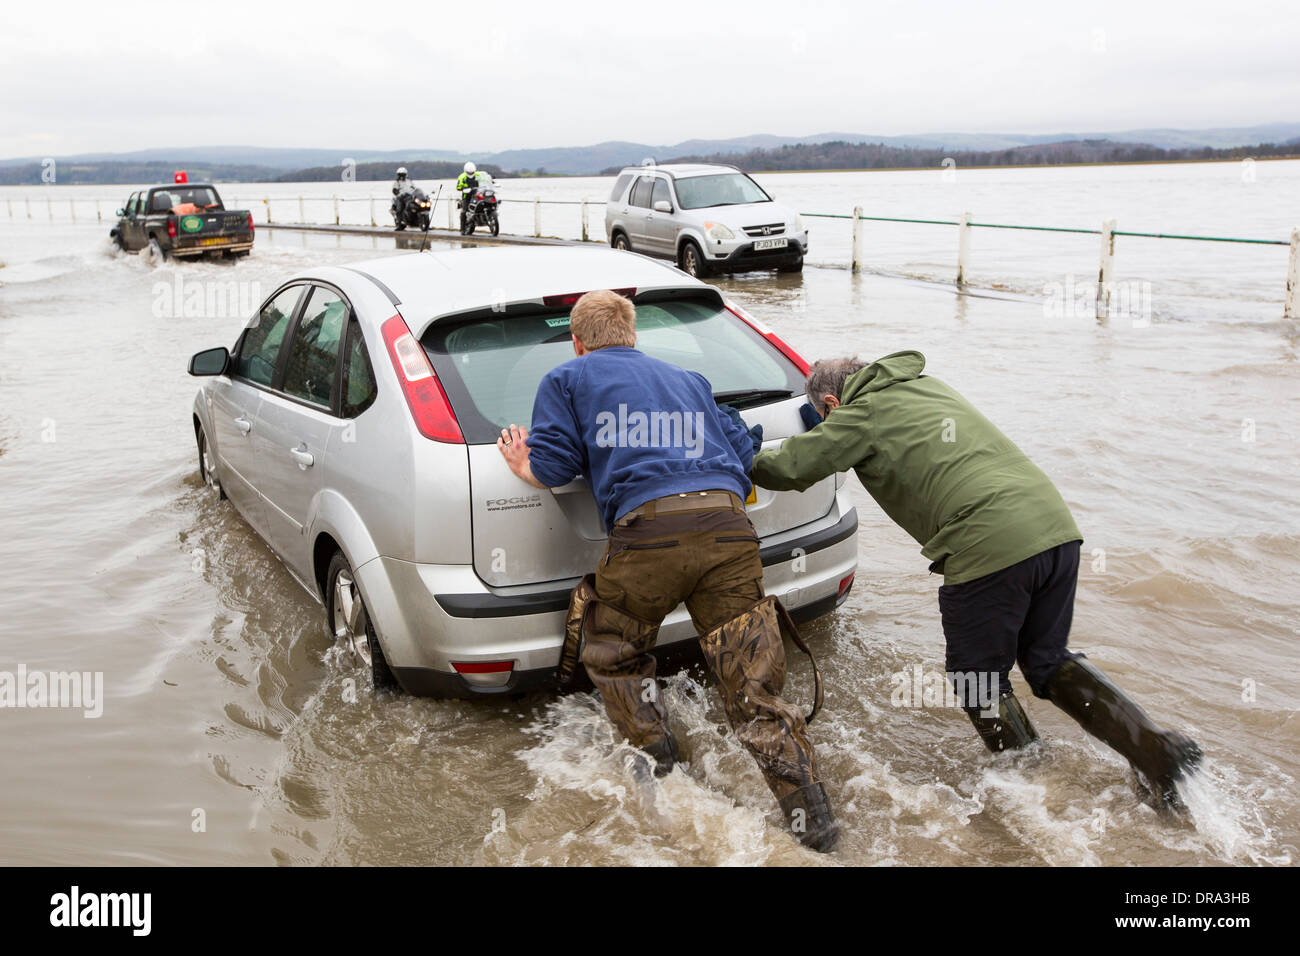 A Car in the flood waters on the road at Storth on the Kent Estuary in Cumbria, UK, during the January 2014 storms Stock Photo